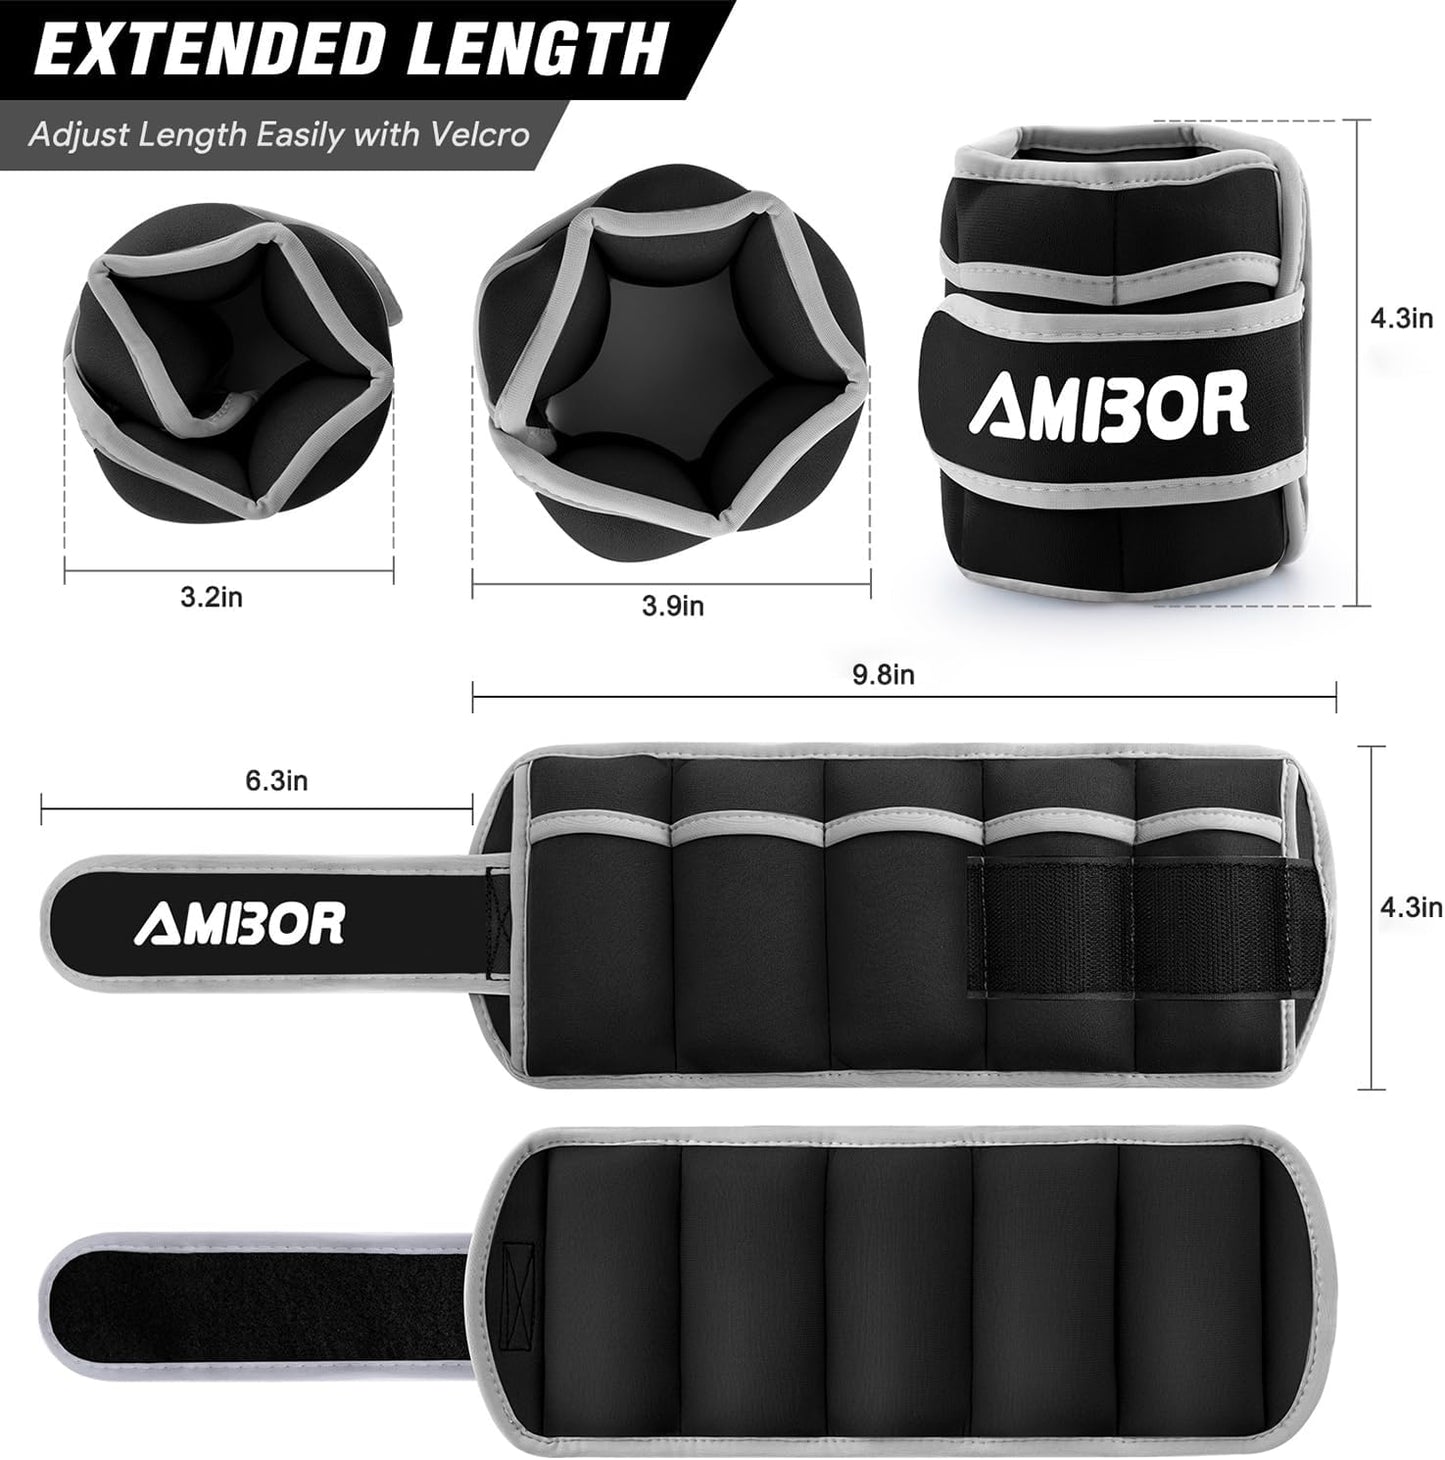 Ankle Weights, 1 Pair 2 3 4 5 Lbs Adjustable Leg Weights, Strength Training Ankle Weights for Men Women Kids, Wrist Weights Strap Set for Walking Running Gym Fitness Workout 2 Pack